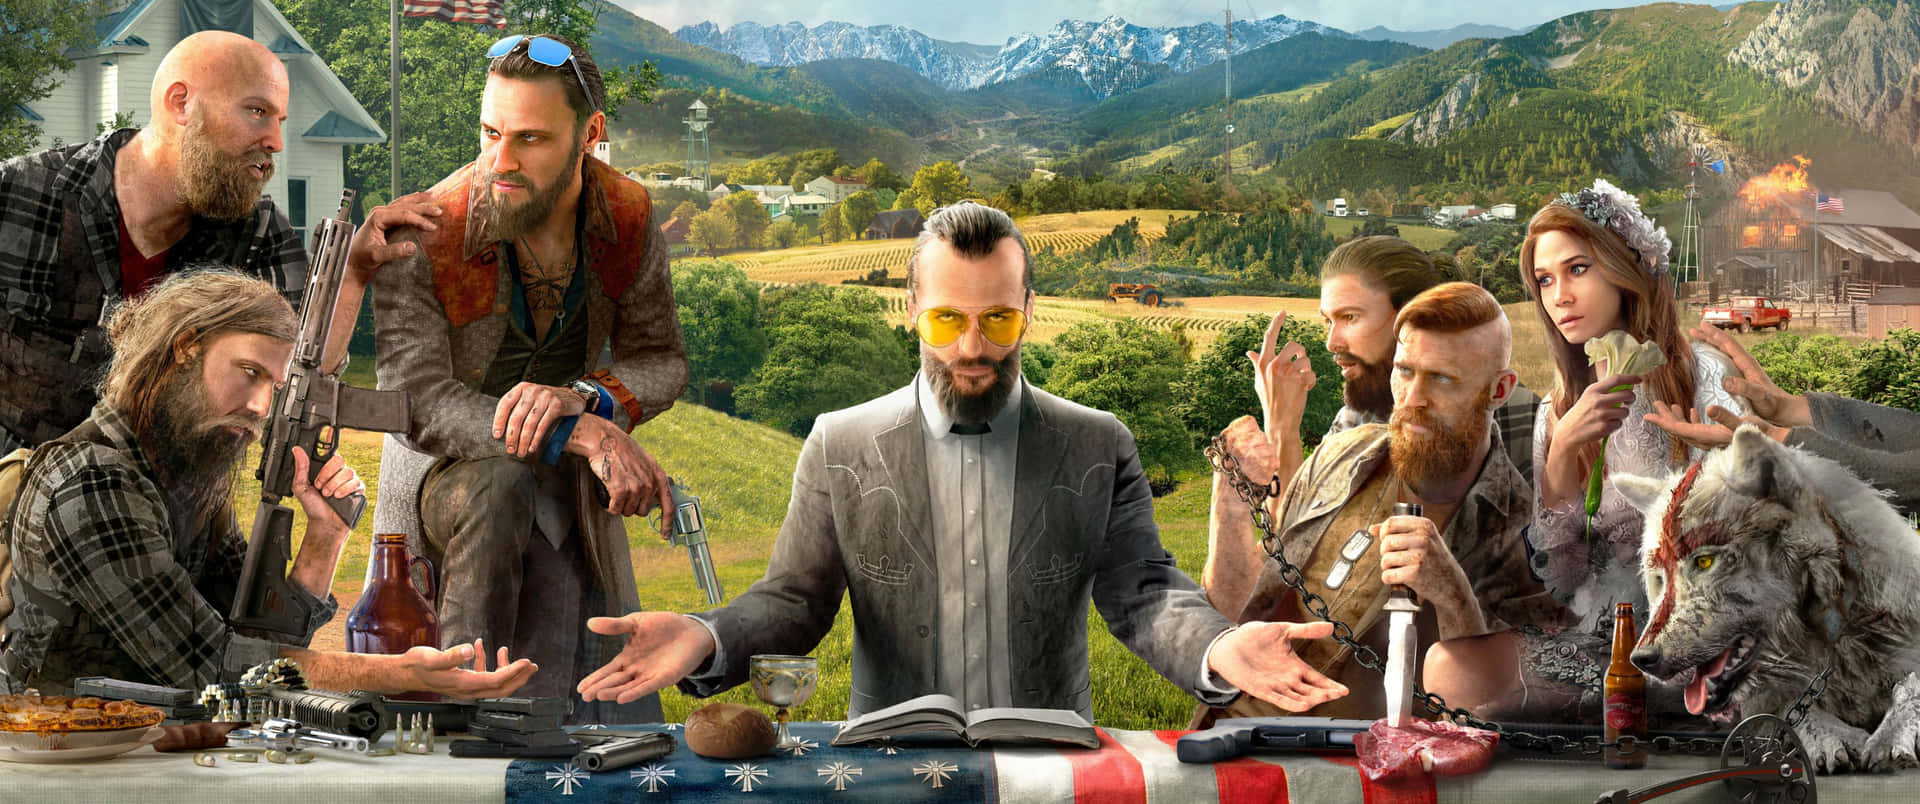 Explore the wilds of Hope County with Far Cry 5 at 3440 X 1440 resolution.